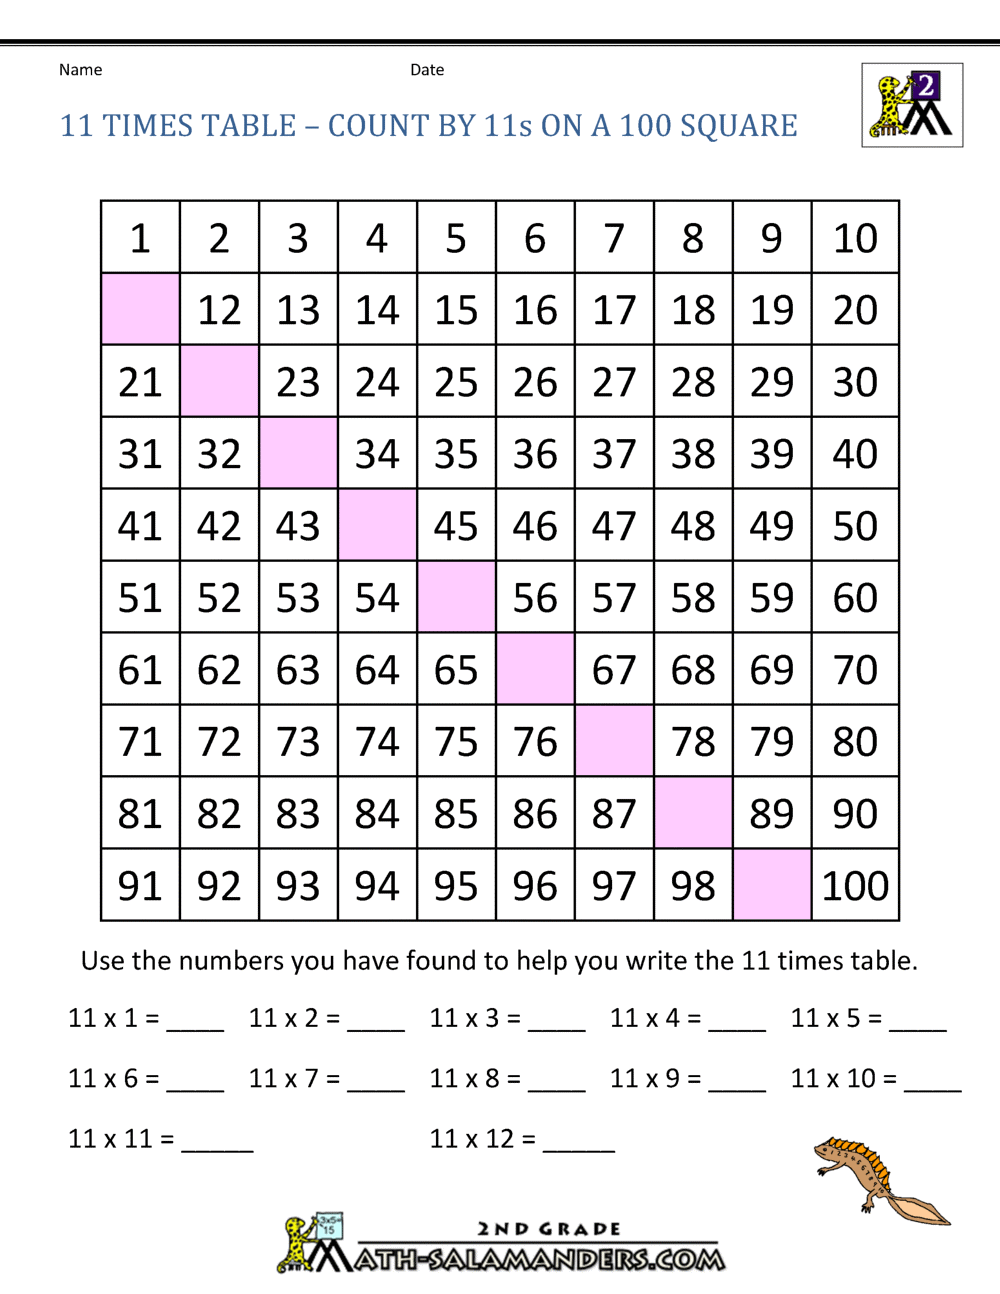  11 Times Table 